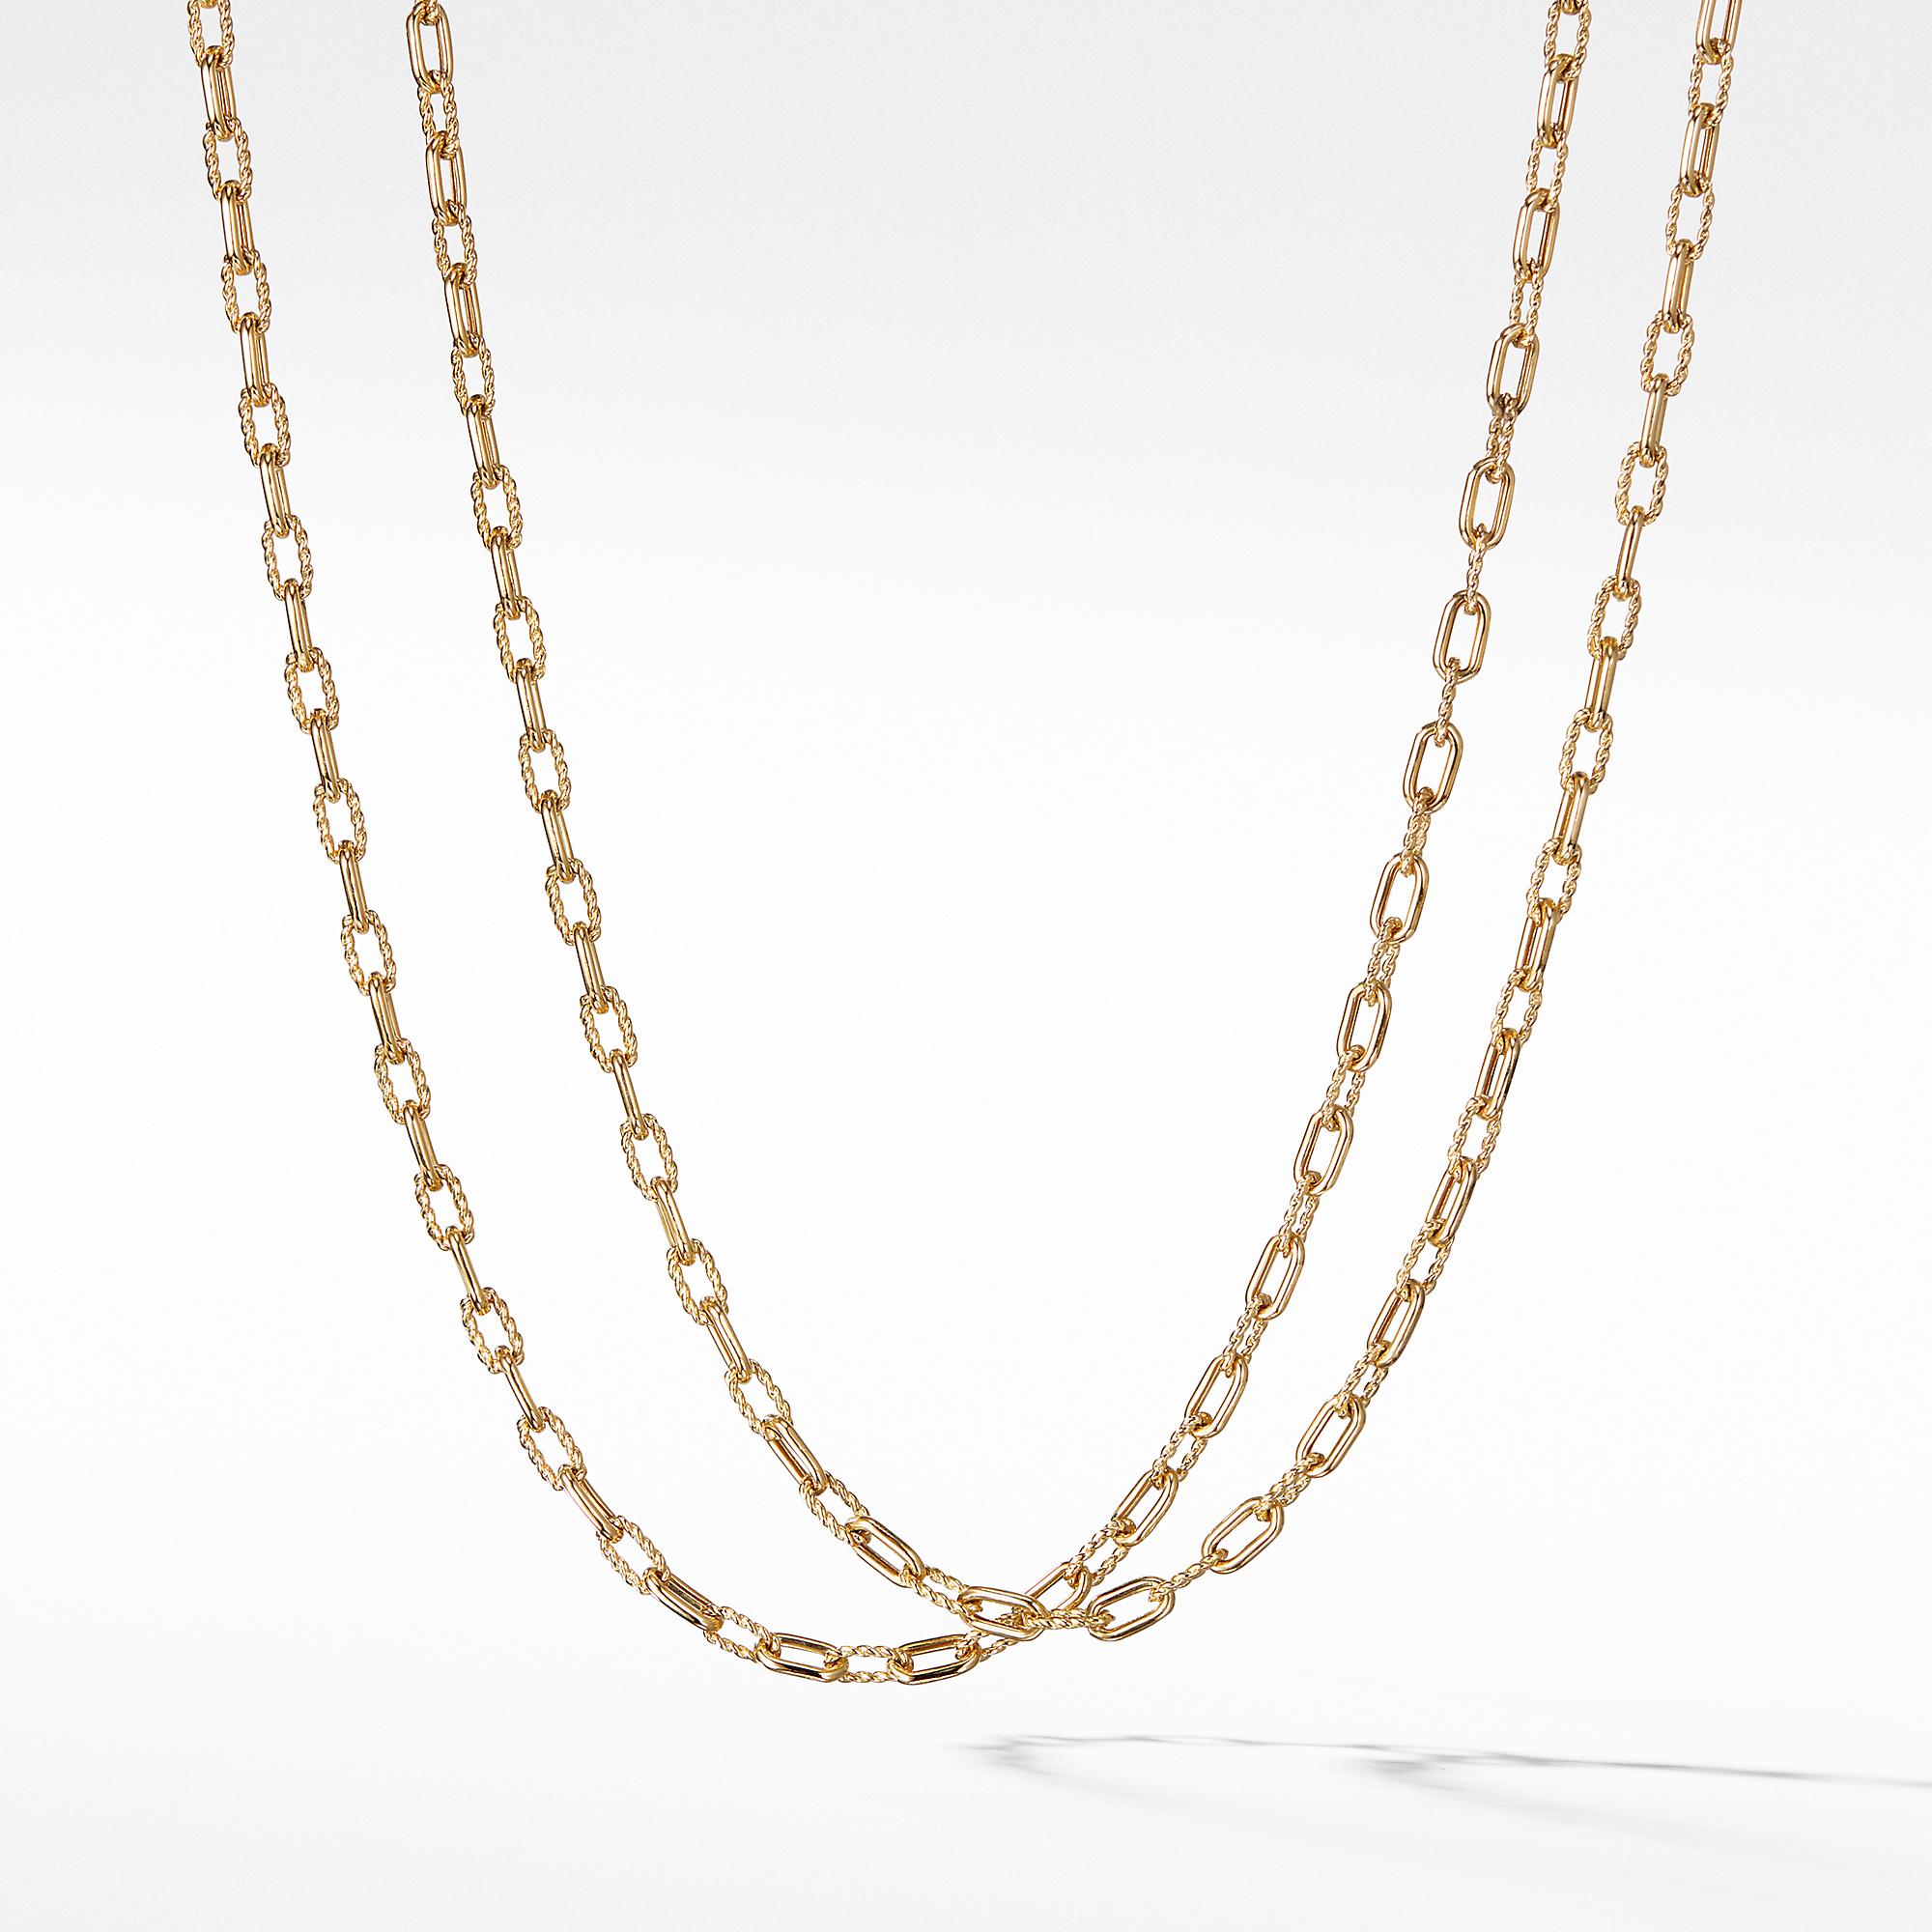 David Yurman DY Madison Extra small Necklace in Yellow Gold, 18 inches